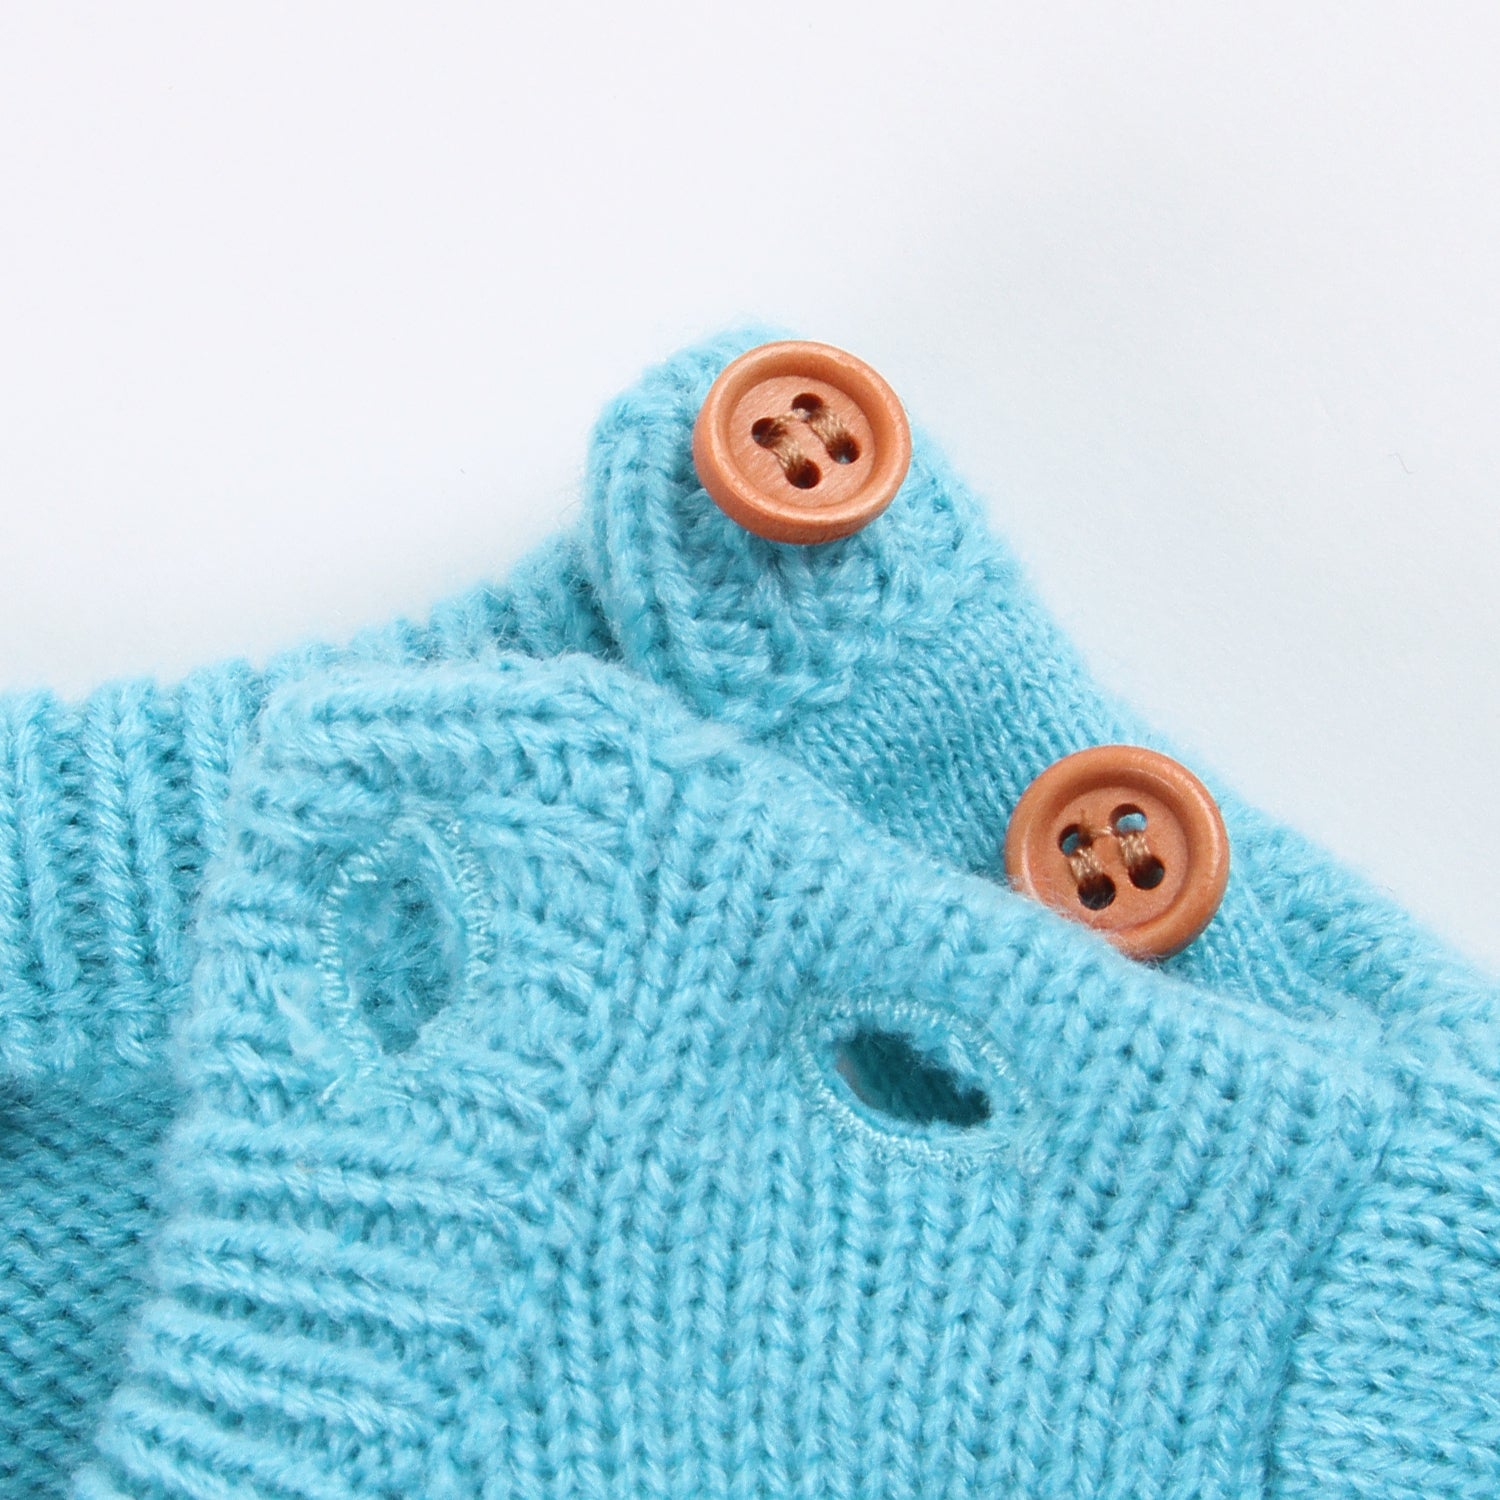 Baby Boys Autumn And Winter Rabbit Pattern Solid Color Knitted Jumpsuit Baby Clothing Cheap Wholesale